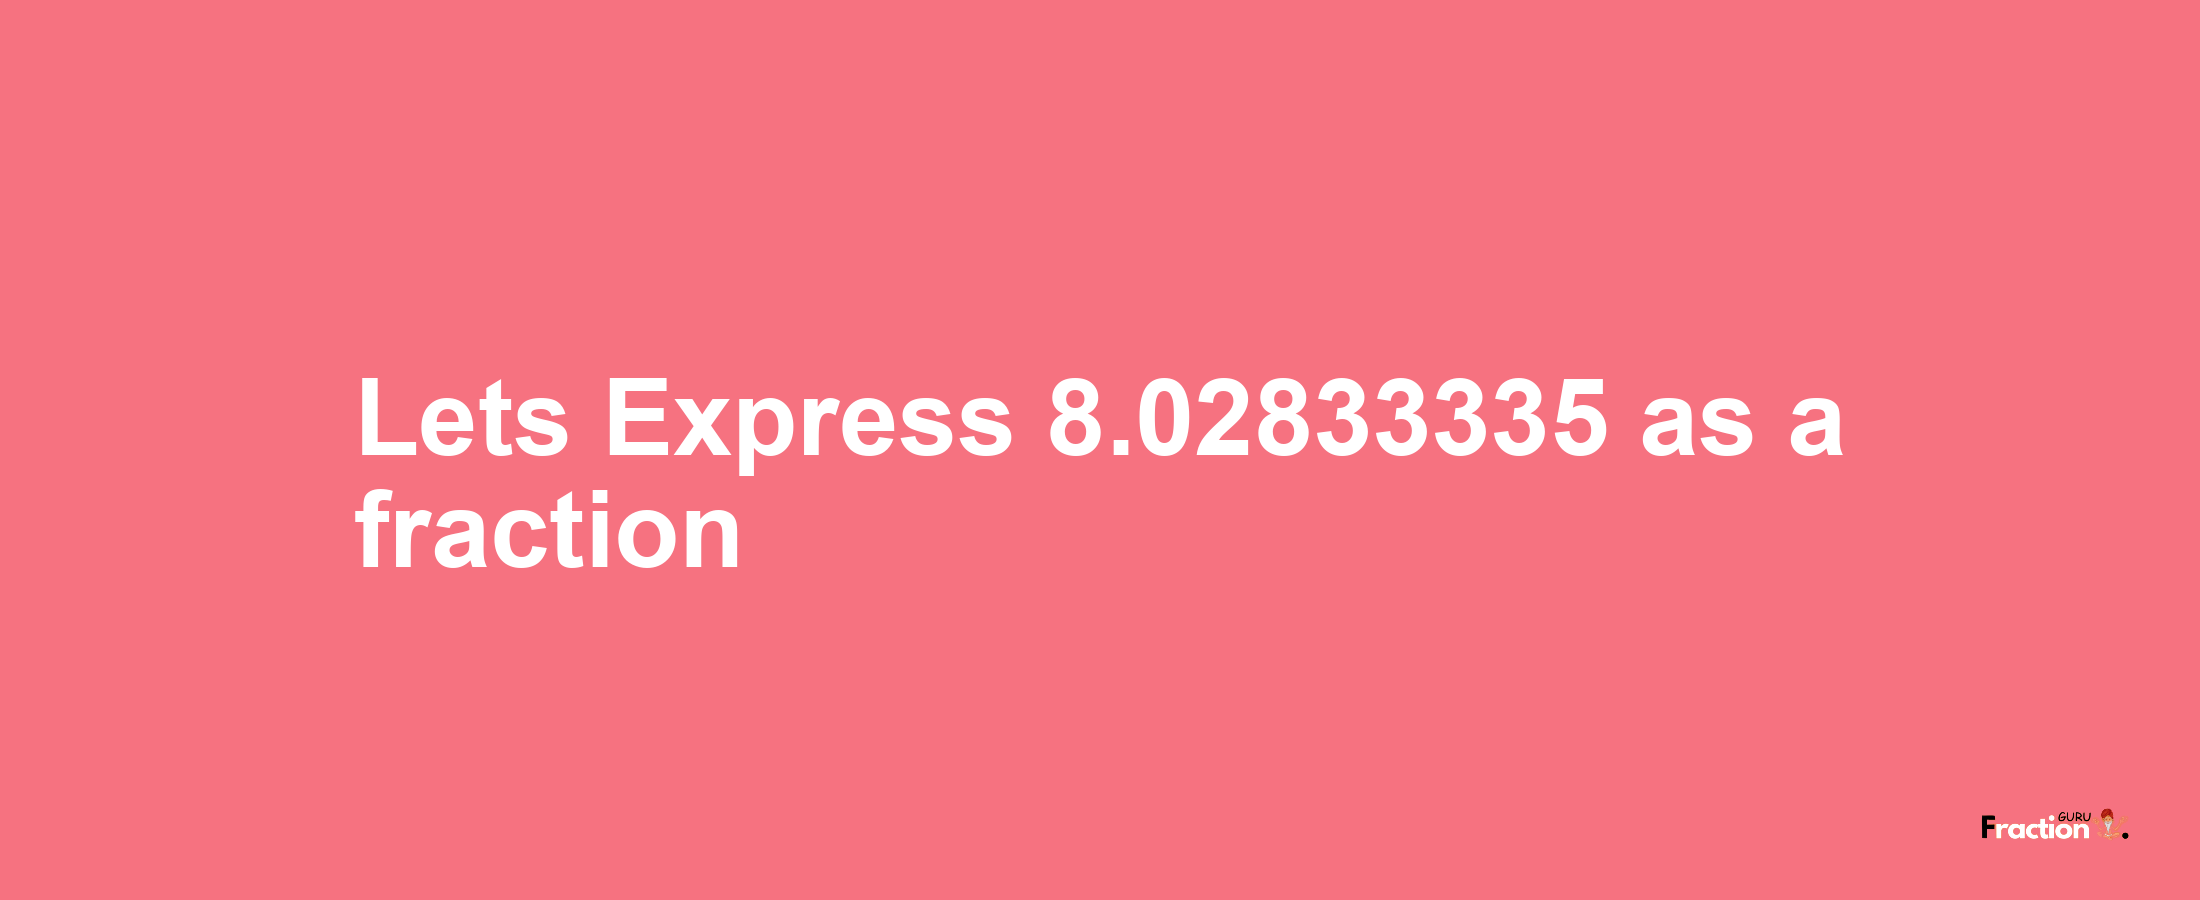 Lets Express 8.02833335 as afraction